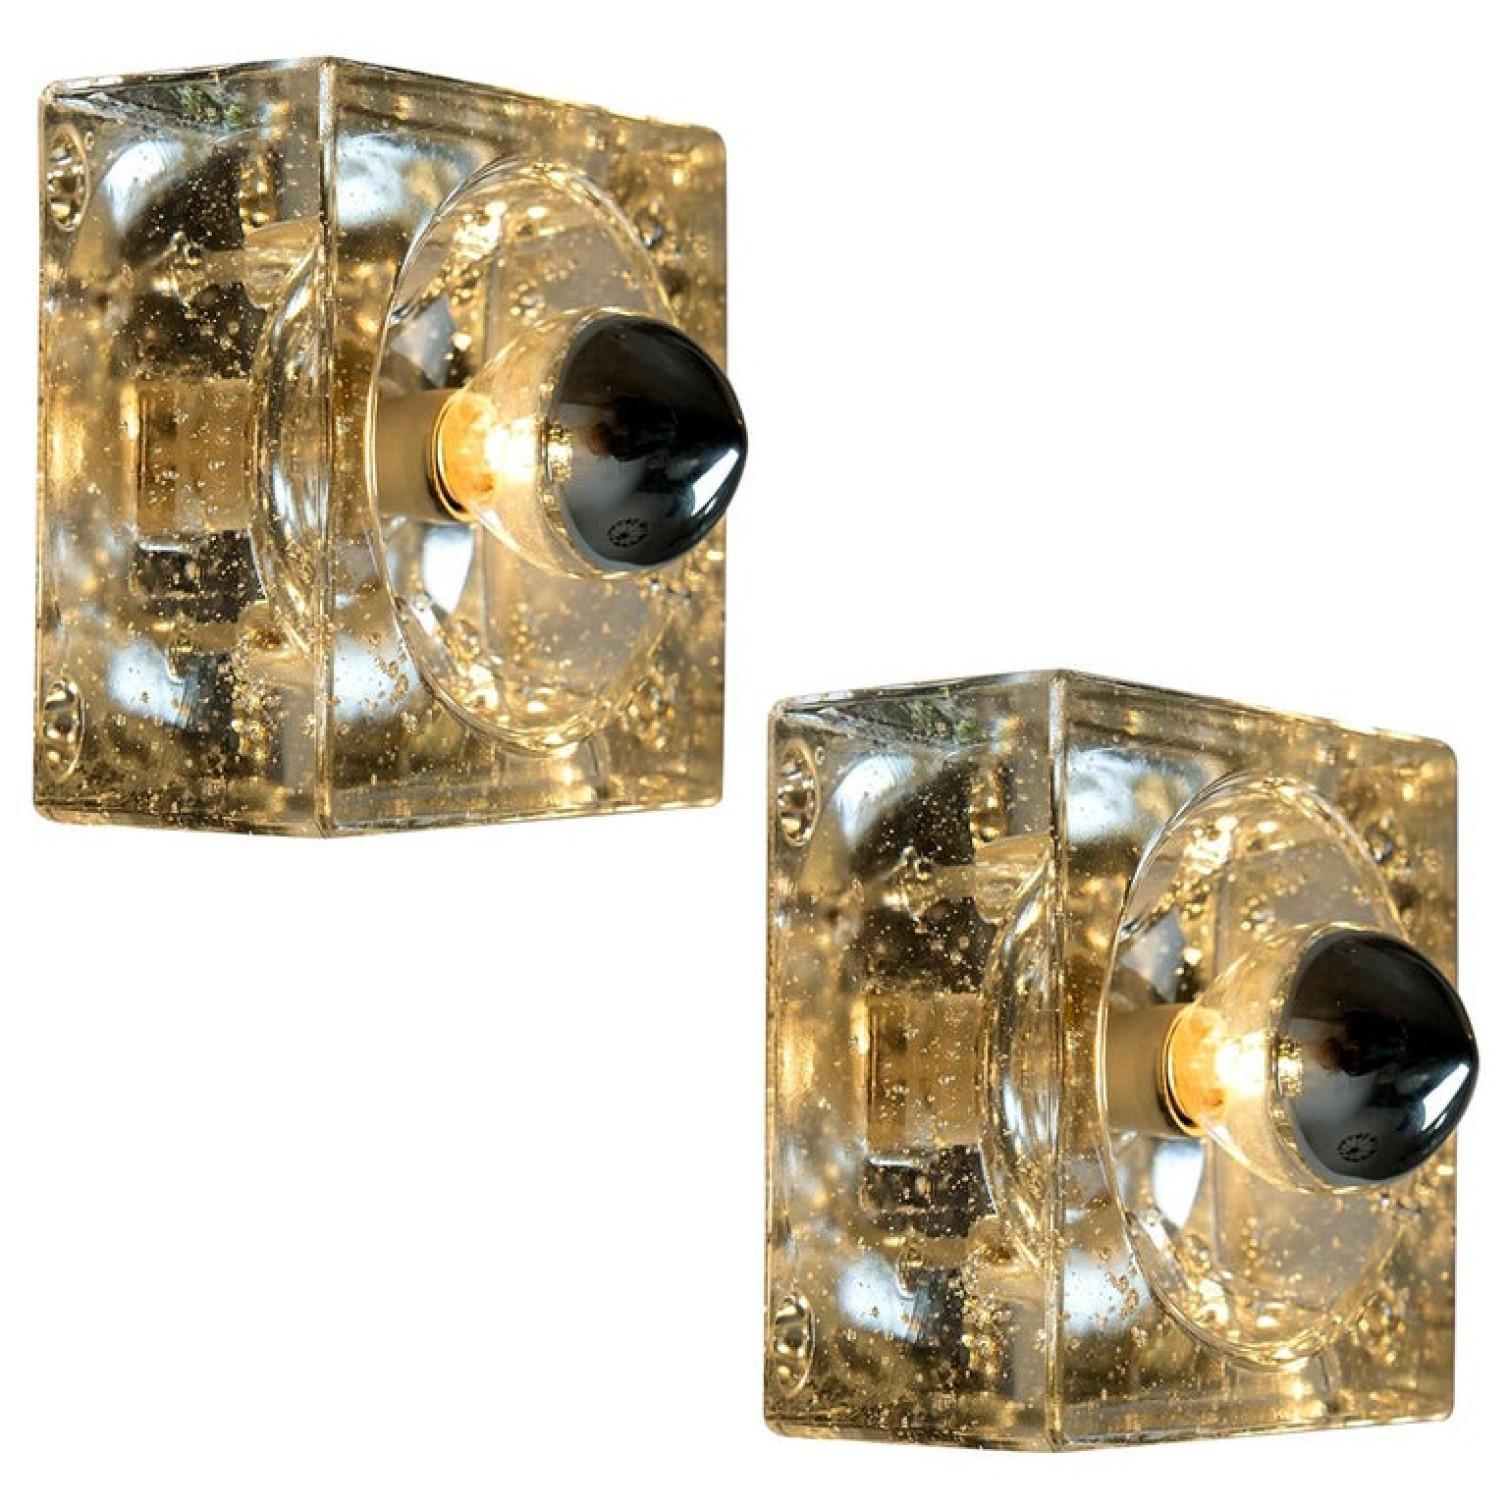 This lights are made from thick hand blown glass on a square silver colored backplate. The glass causes a nice lighting effect on the ceiling, table or wall. Each lamp has one E14 fitting (Max 25 Watt)

Can work for impressive wall, table or ceiling